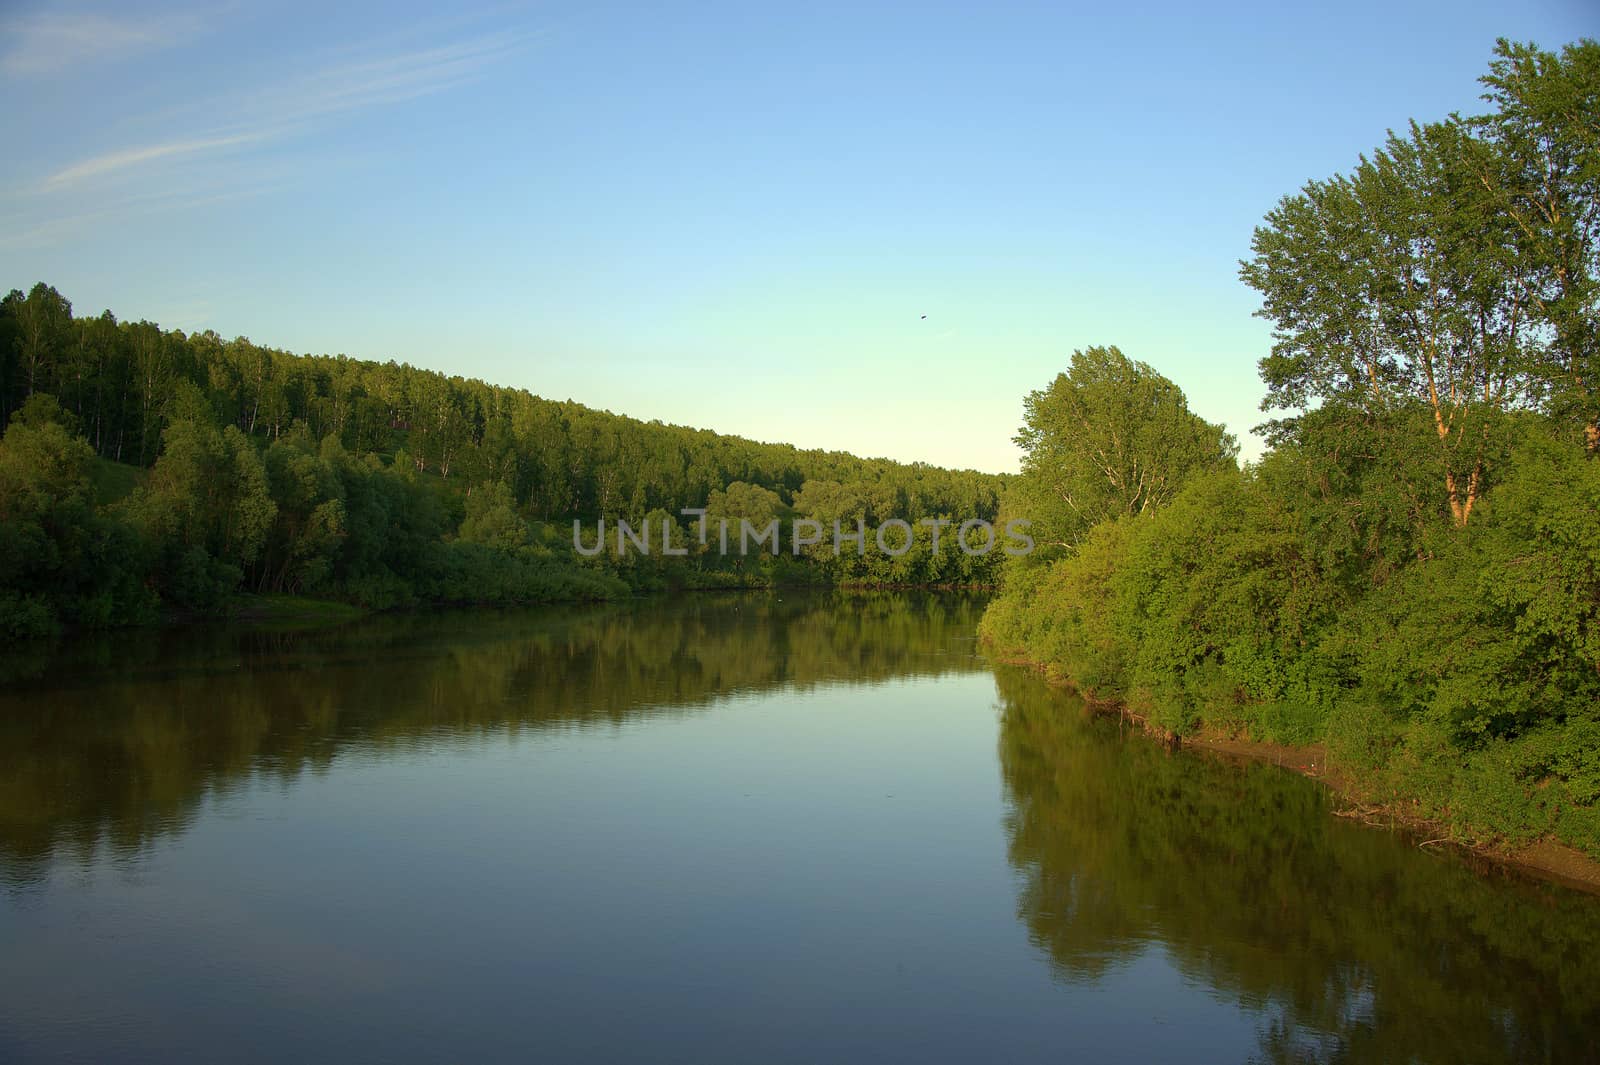 The calm flow of the forest river reflects in its waters the forest on the banks and the sky.